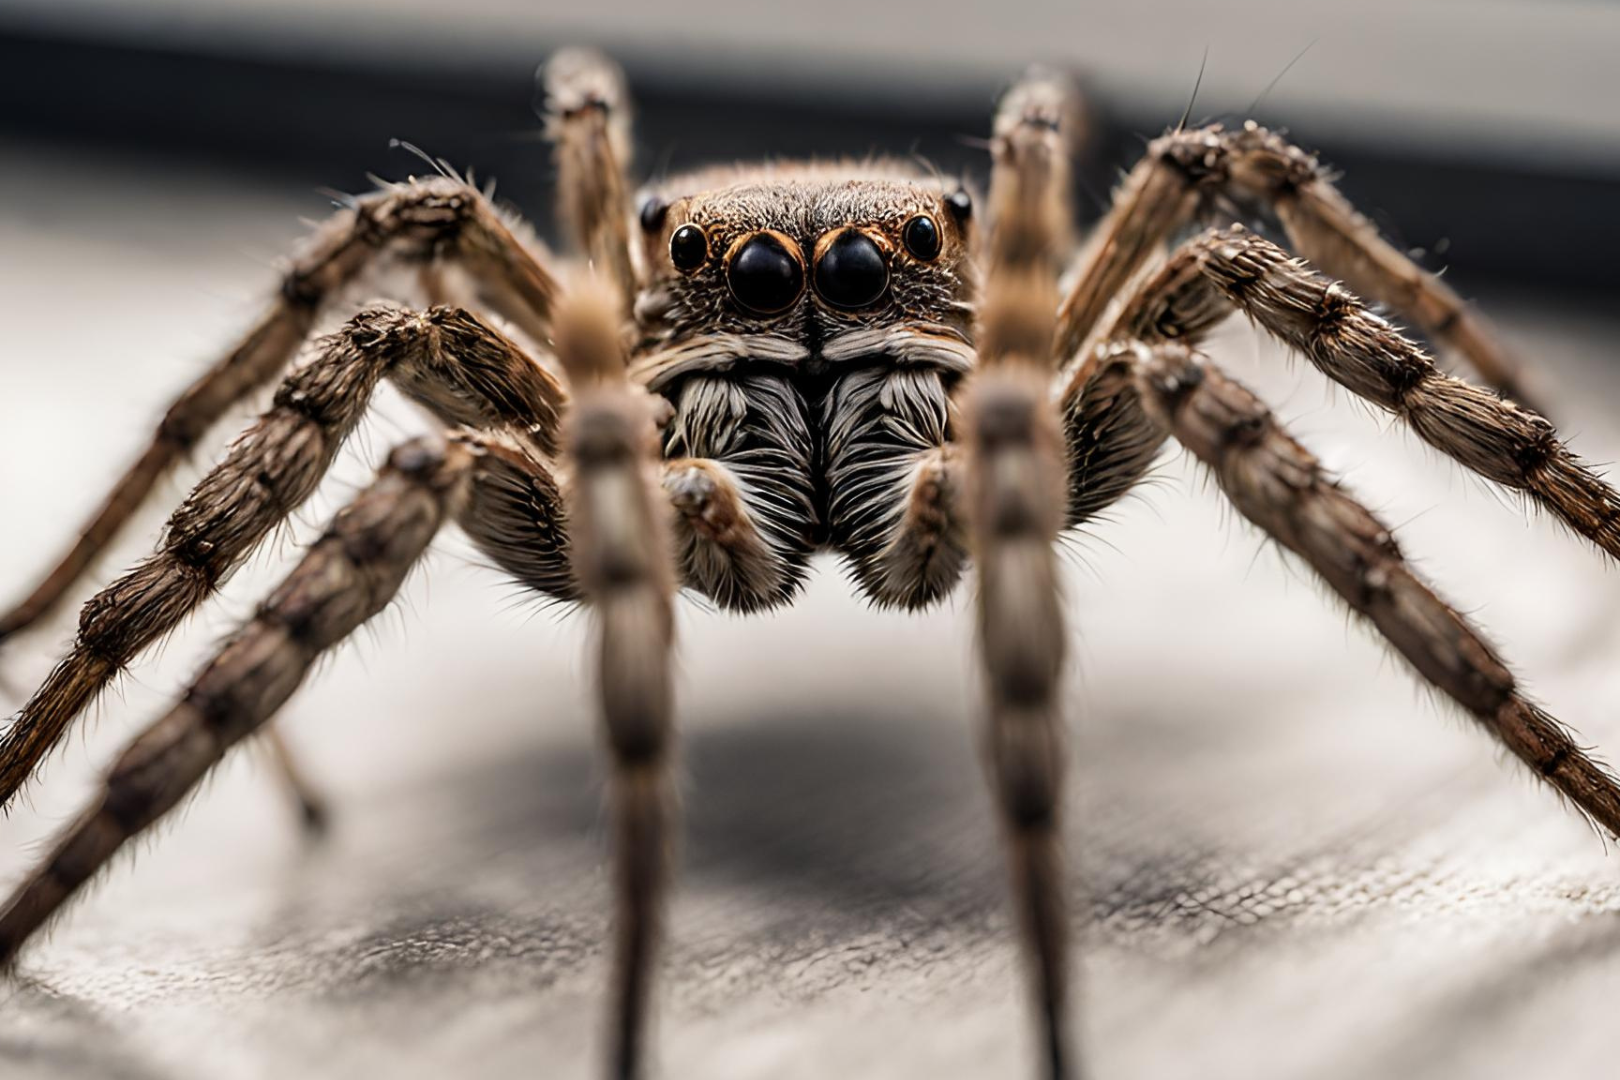 keep spiders away with a clean home free of other bugs